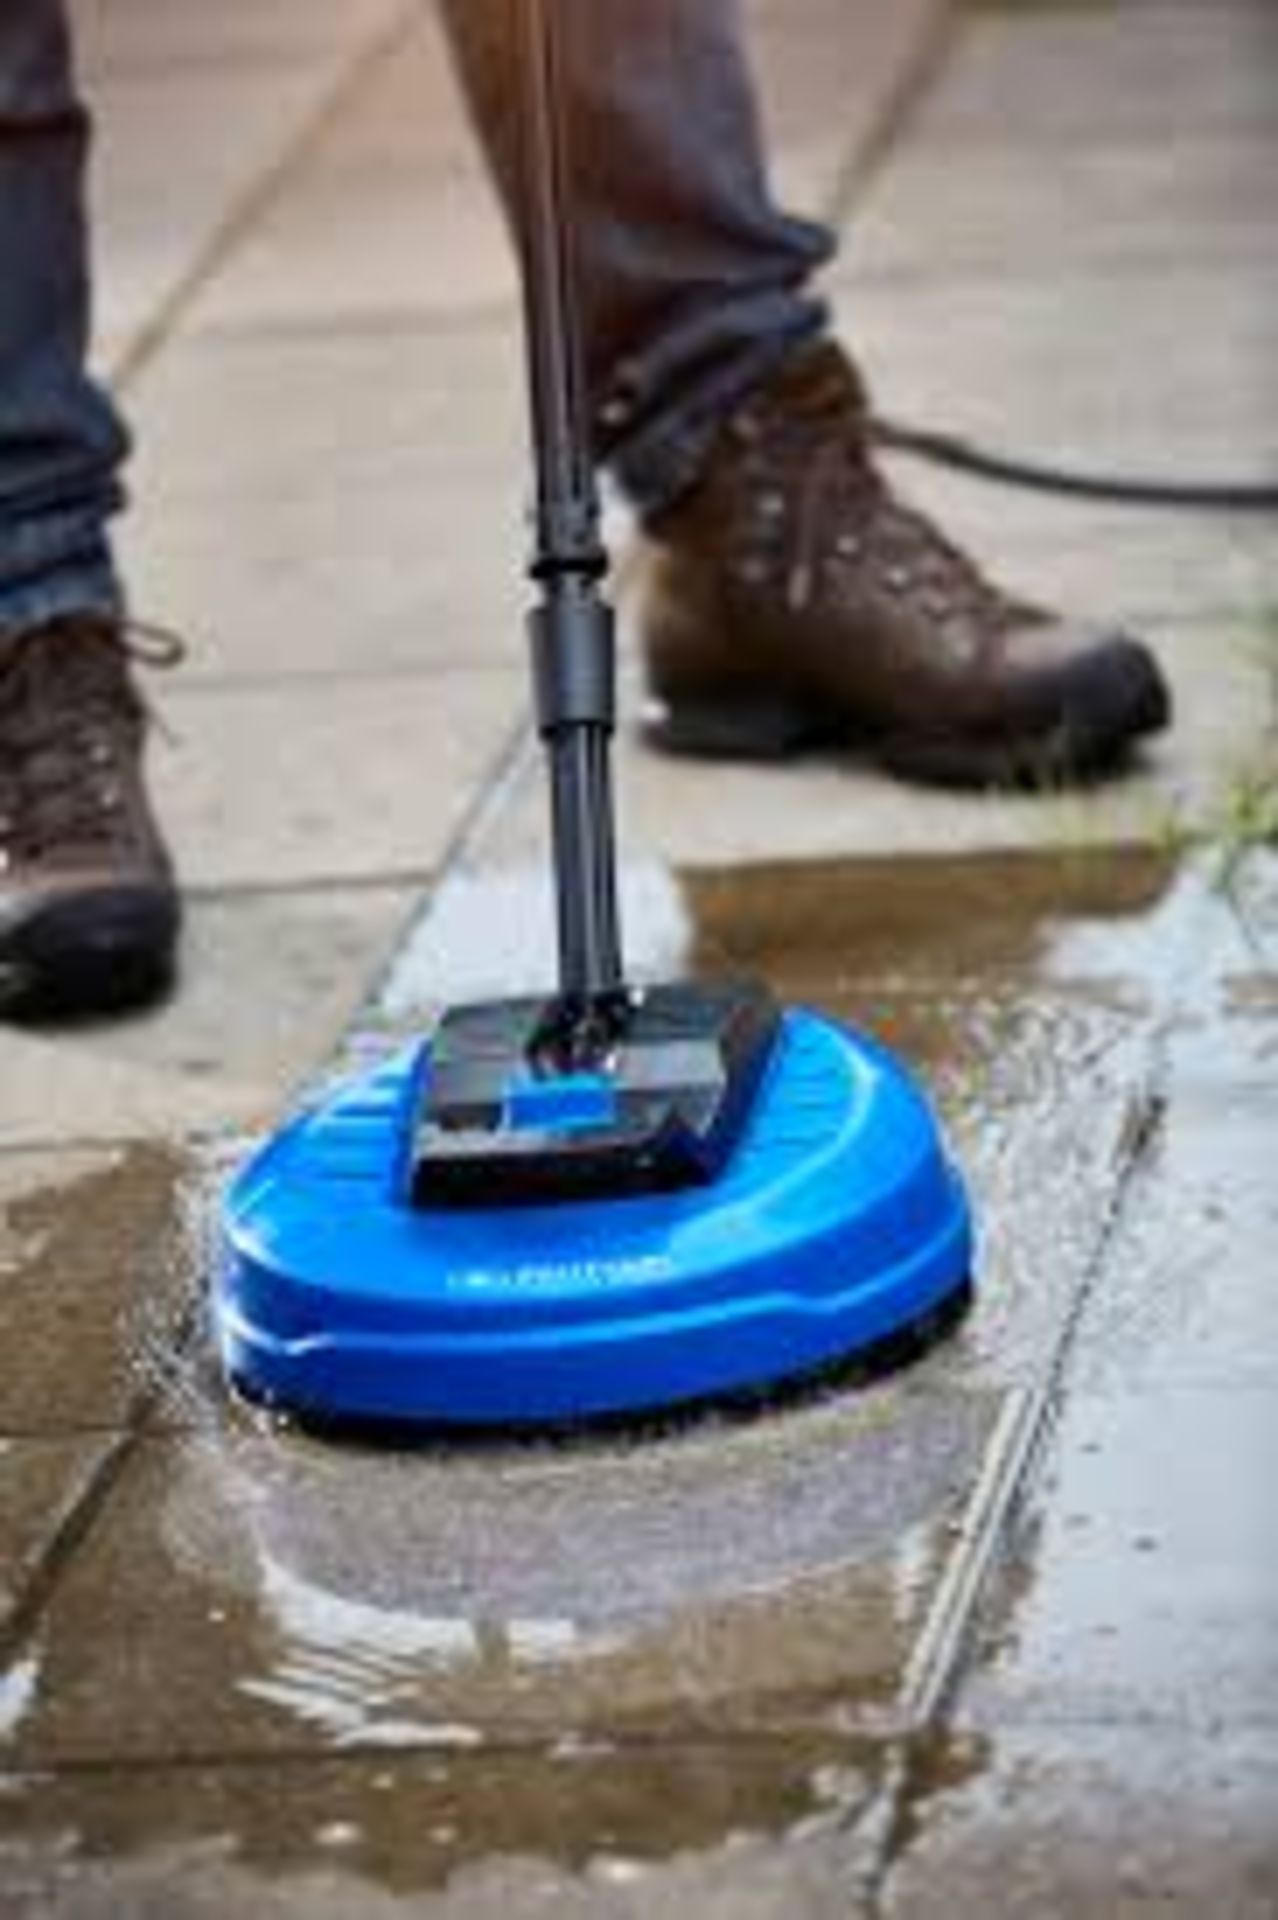 NILFISK COMPACT PATIO CLEANER. LOCATION - 13A.6